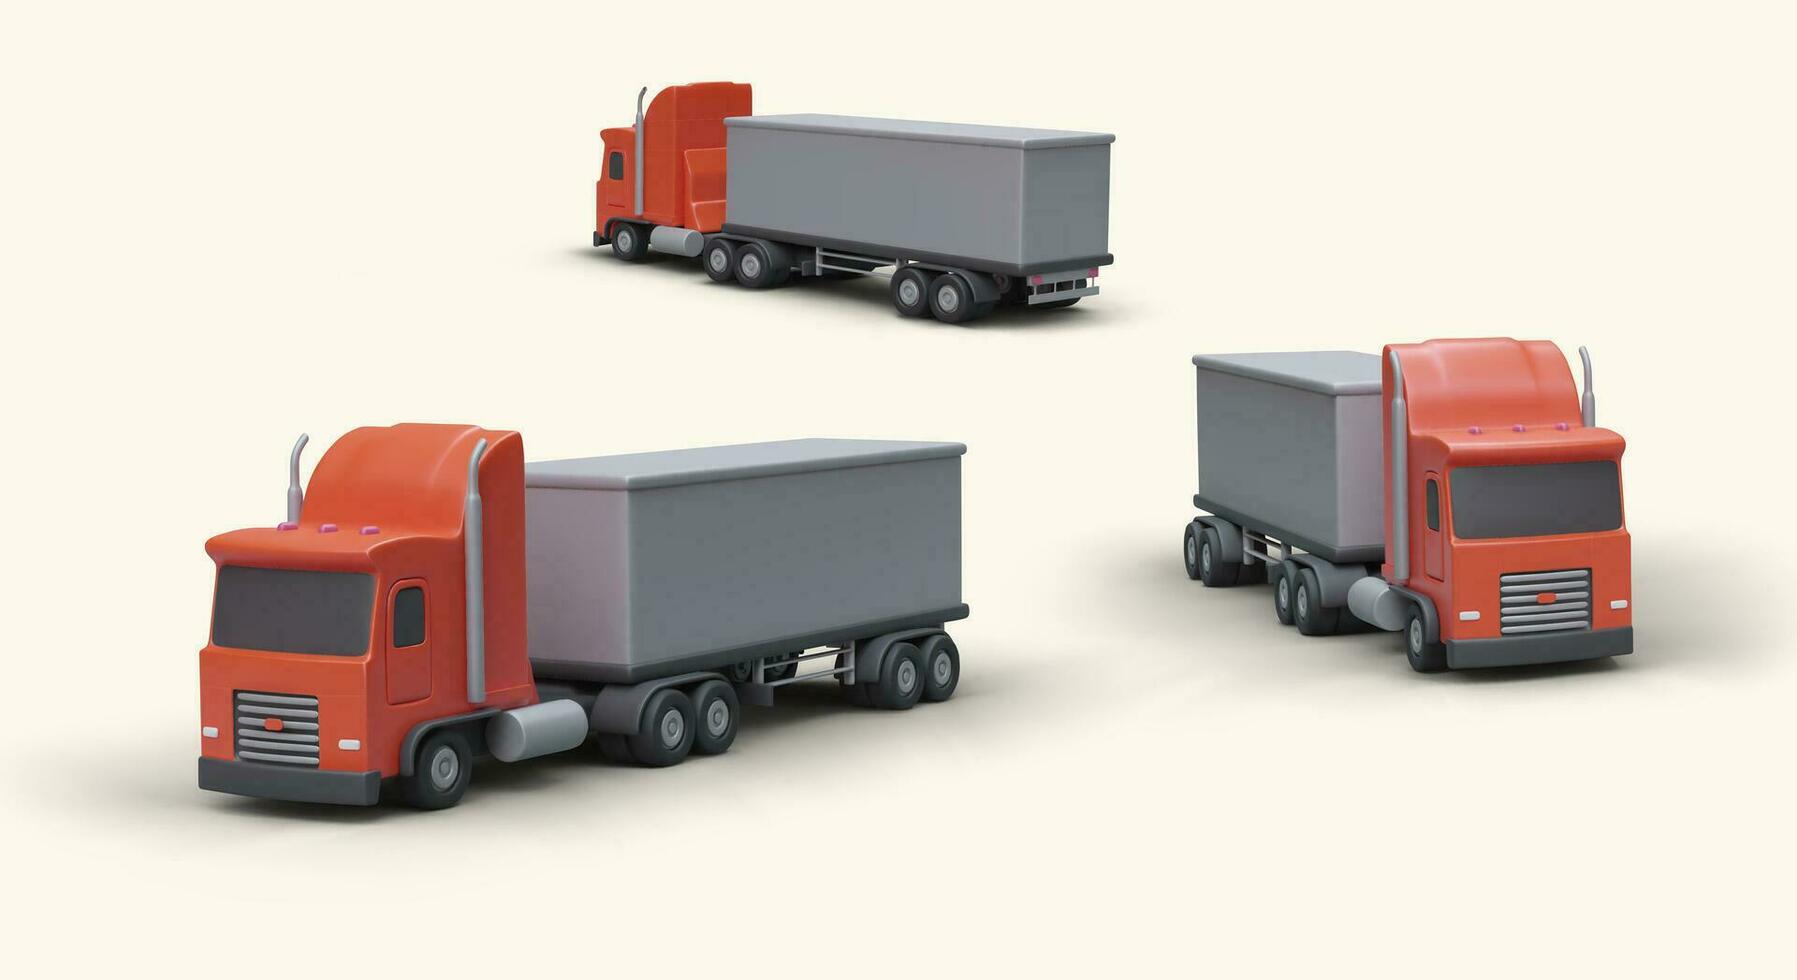 Modern 3D trucks, ready to go. Vehicles with big body and red cab vector